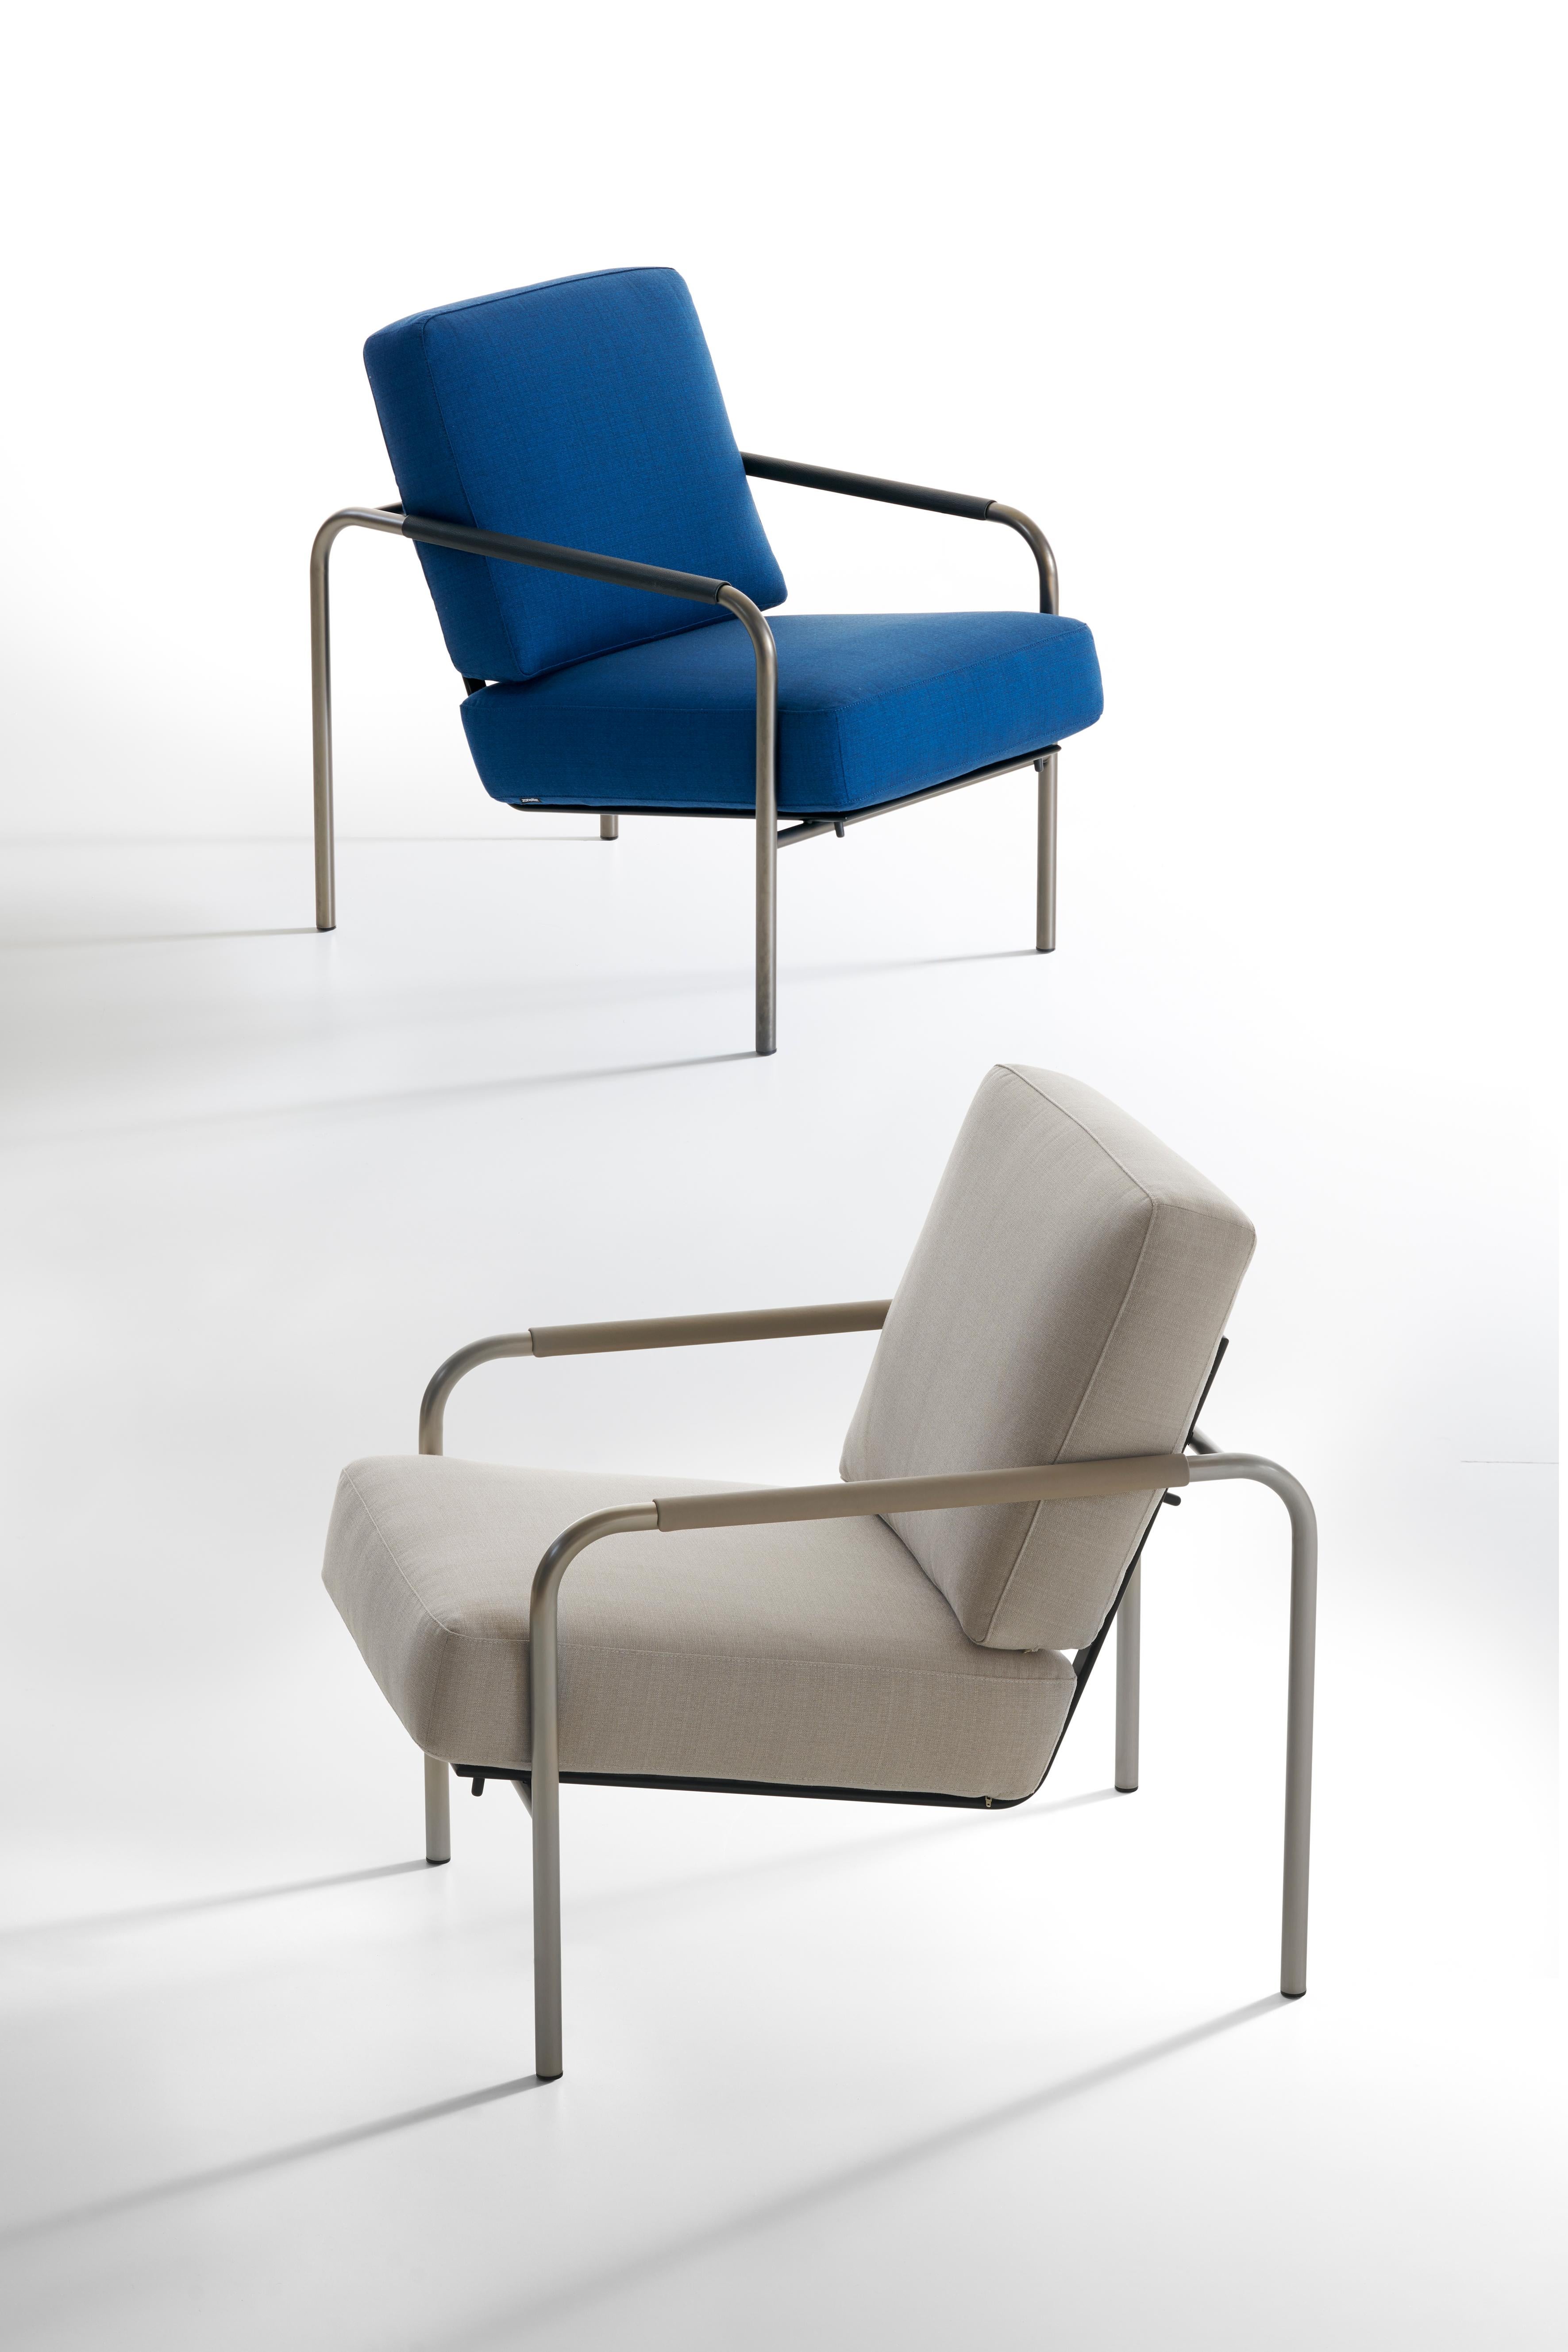 Zanotta Susanna Armchair in Talento 27602 Fabric & Nickel-Satin Finished Frame

Frame in chromium-plated, or in natural or black nickel- satin finished, or black painted tubular steel. Adjustable two- position cushion support in black painted